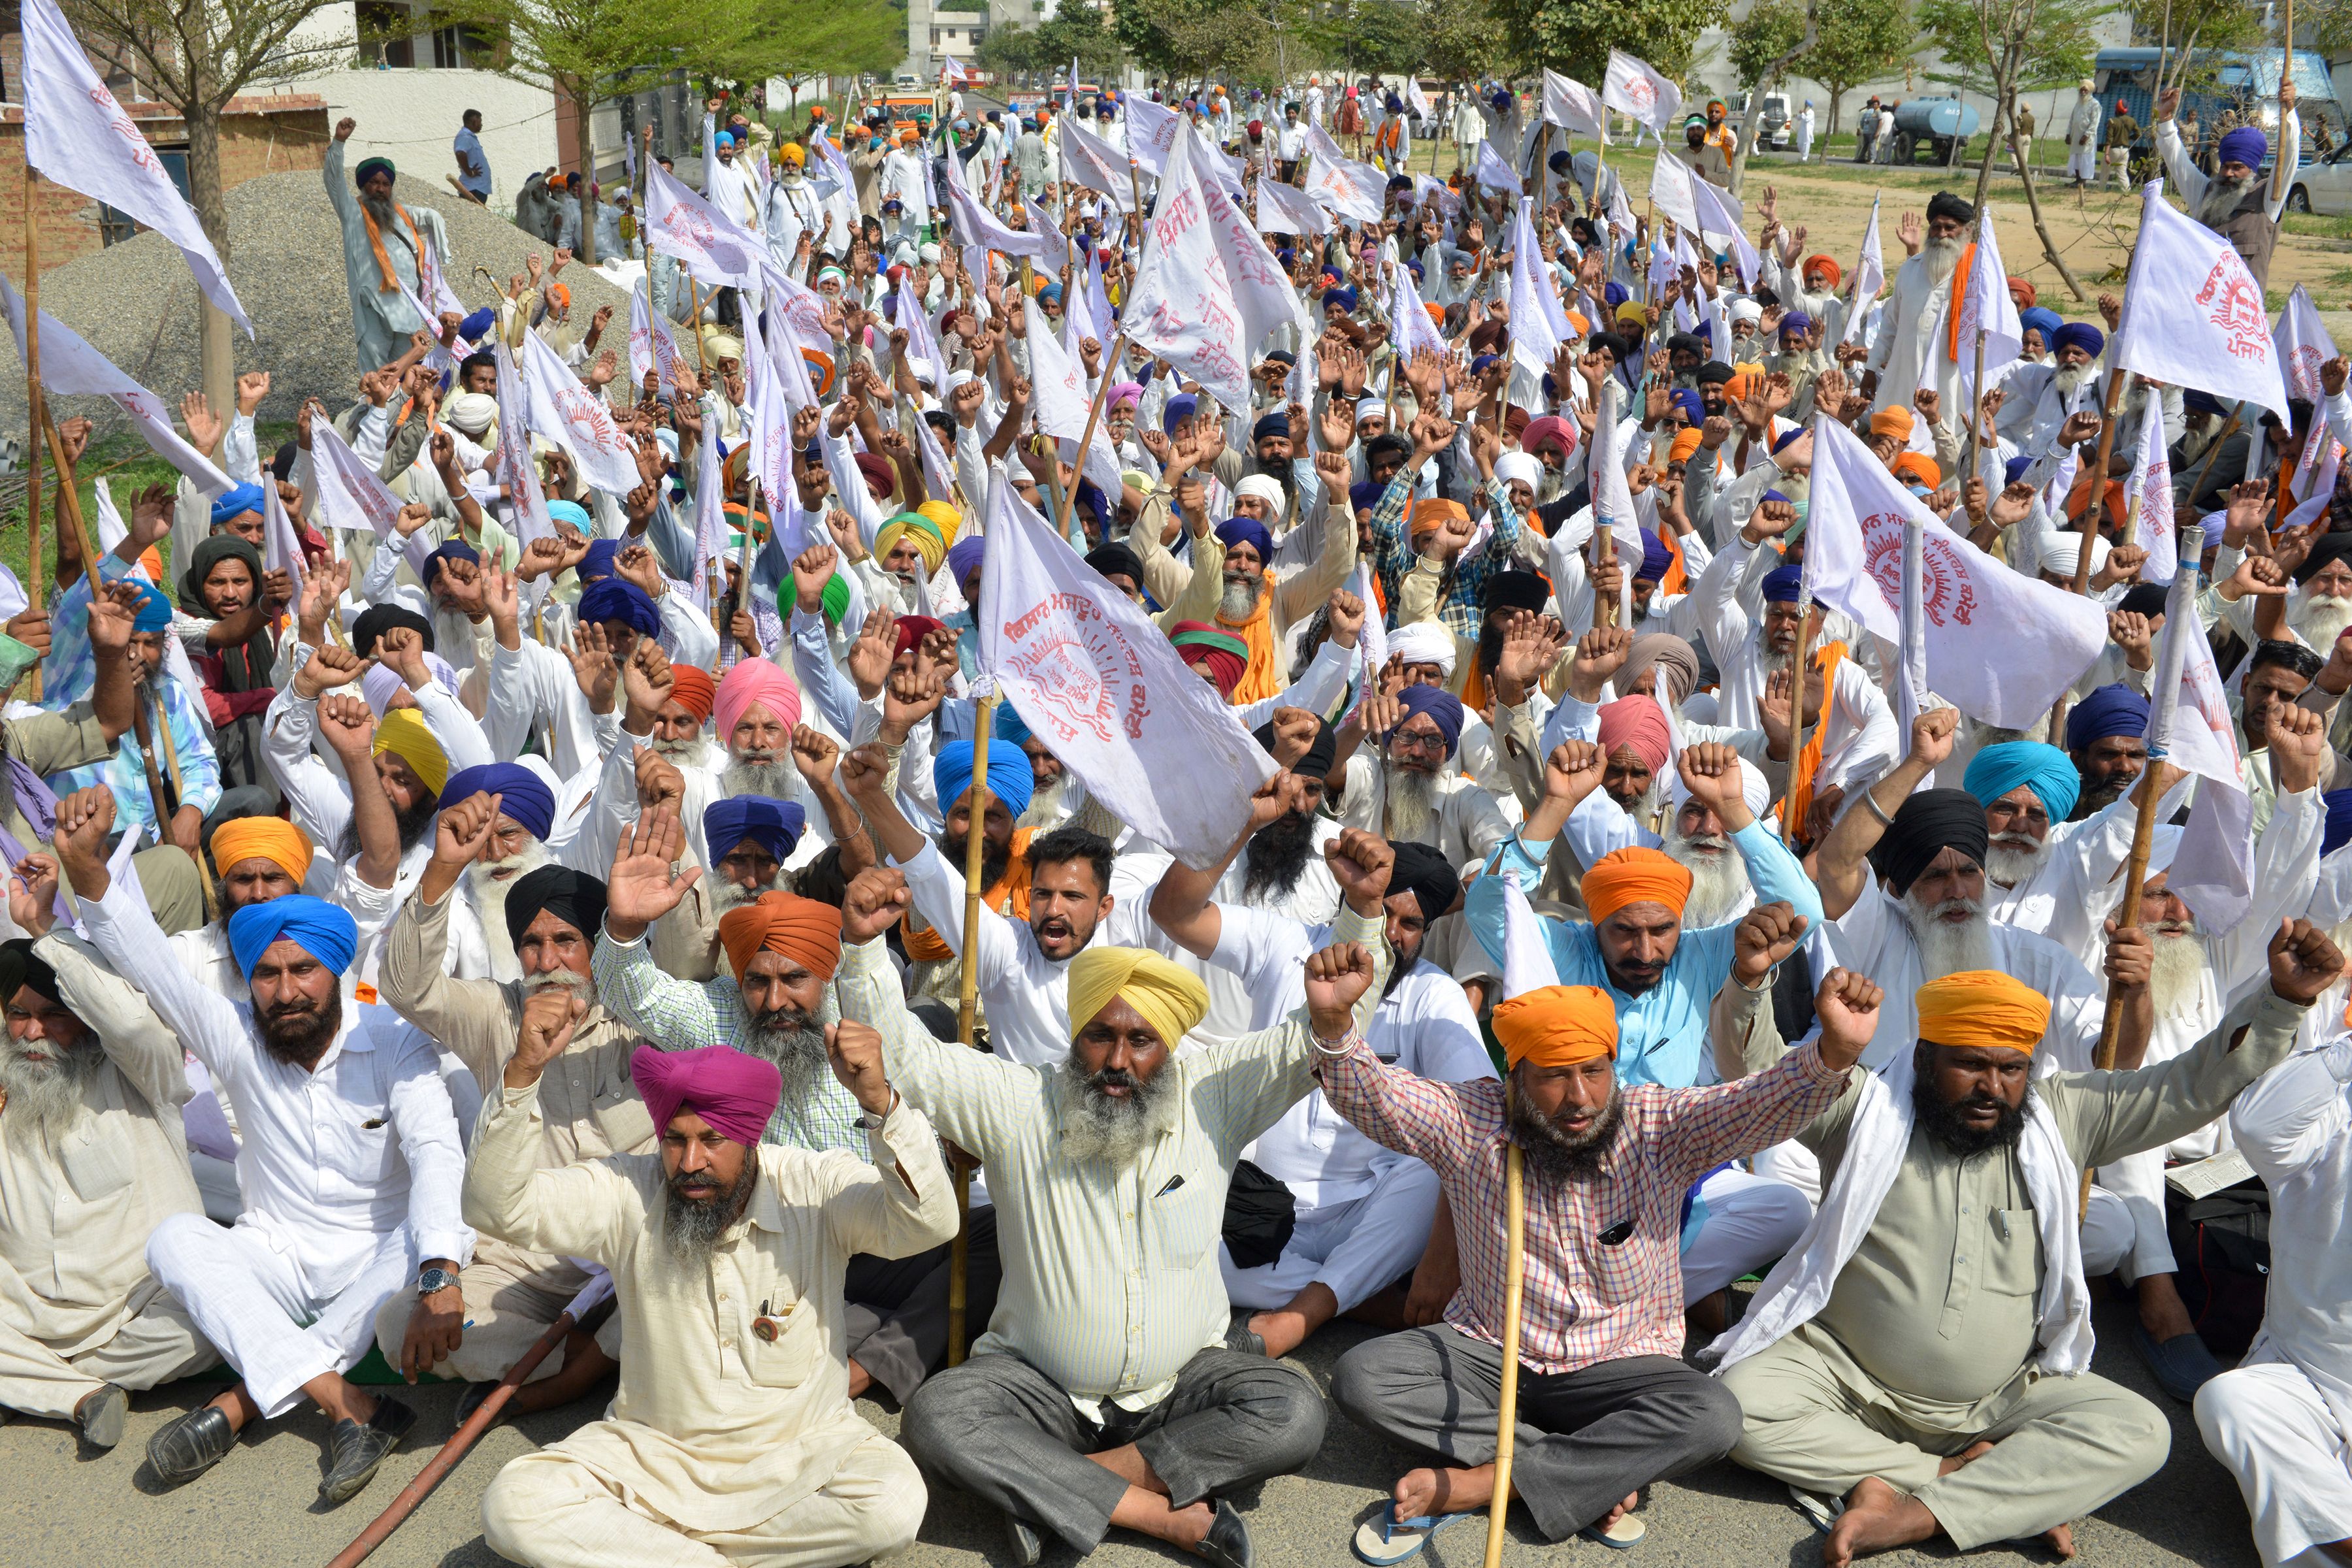 Indian farmers protest against the alleged anti-farmer policies imposed by the central and state government, in Amritsar on March 30, 2019.